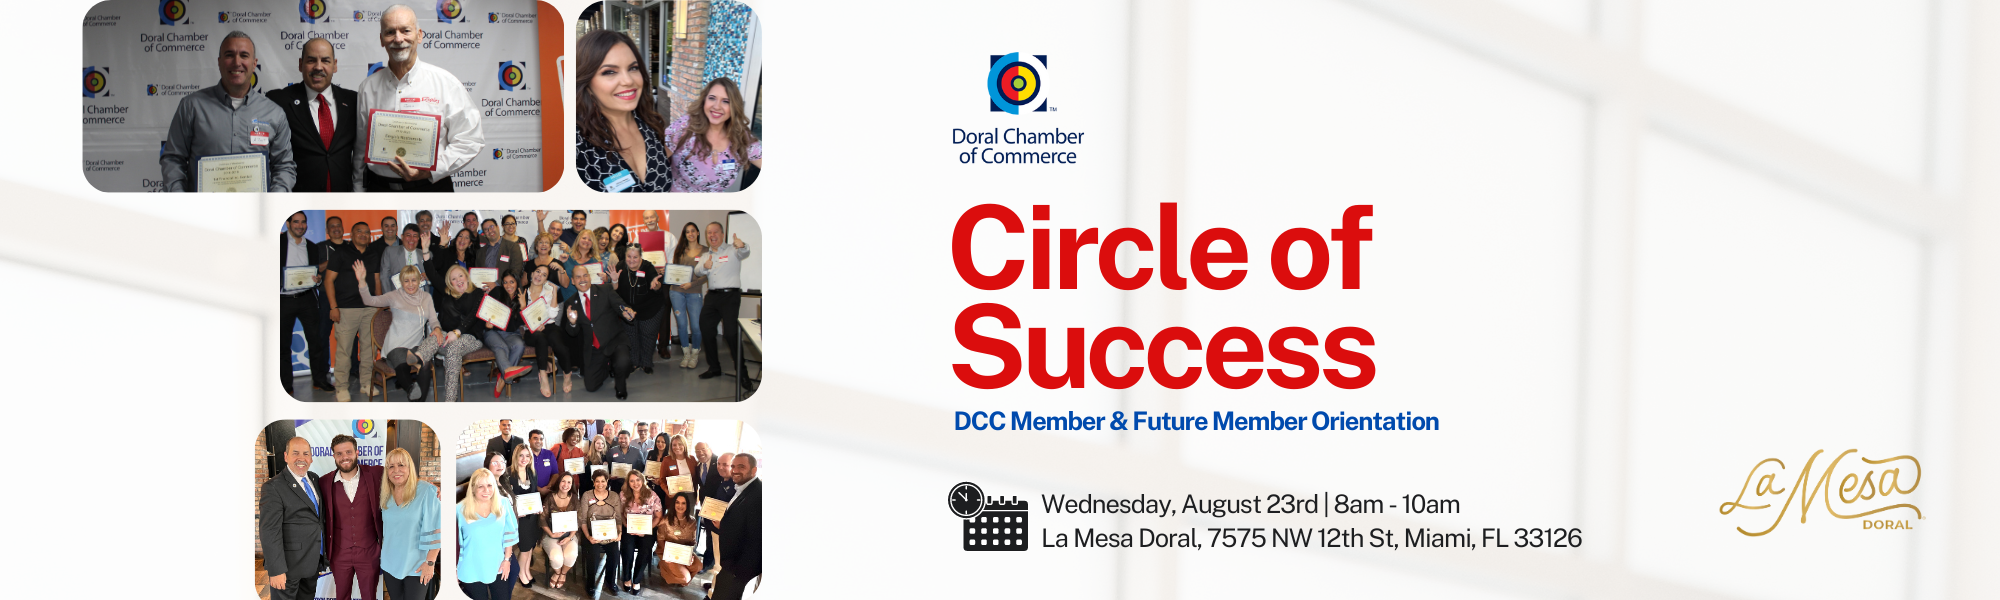 Circle of Success Doral Chamber of Commerce Benefits Networking Event.